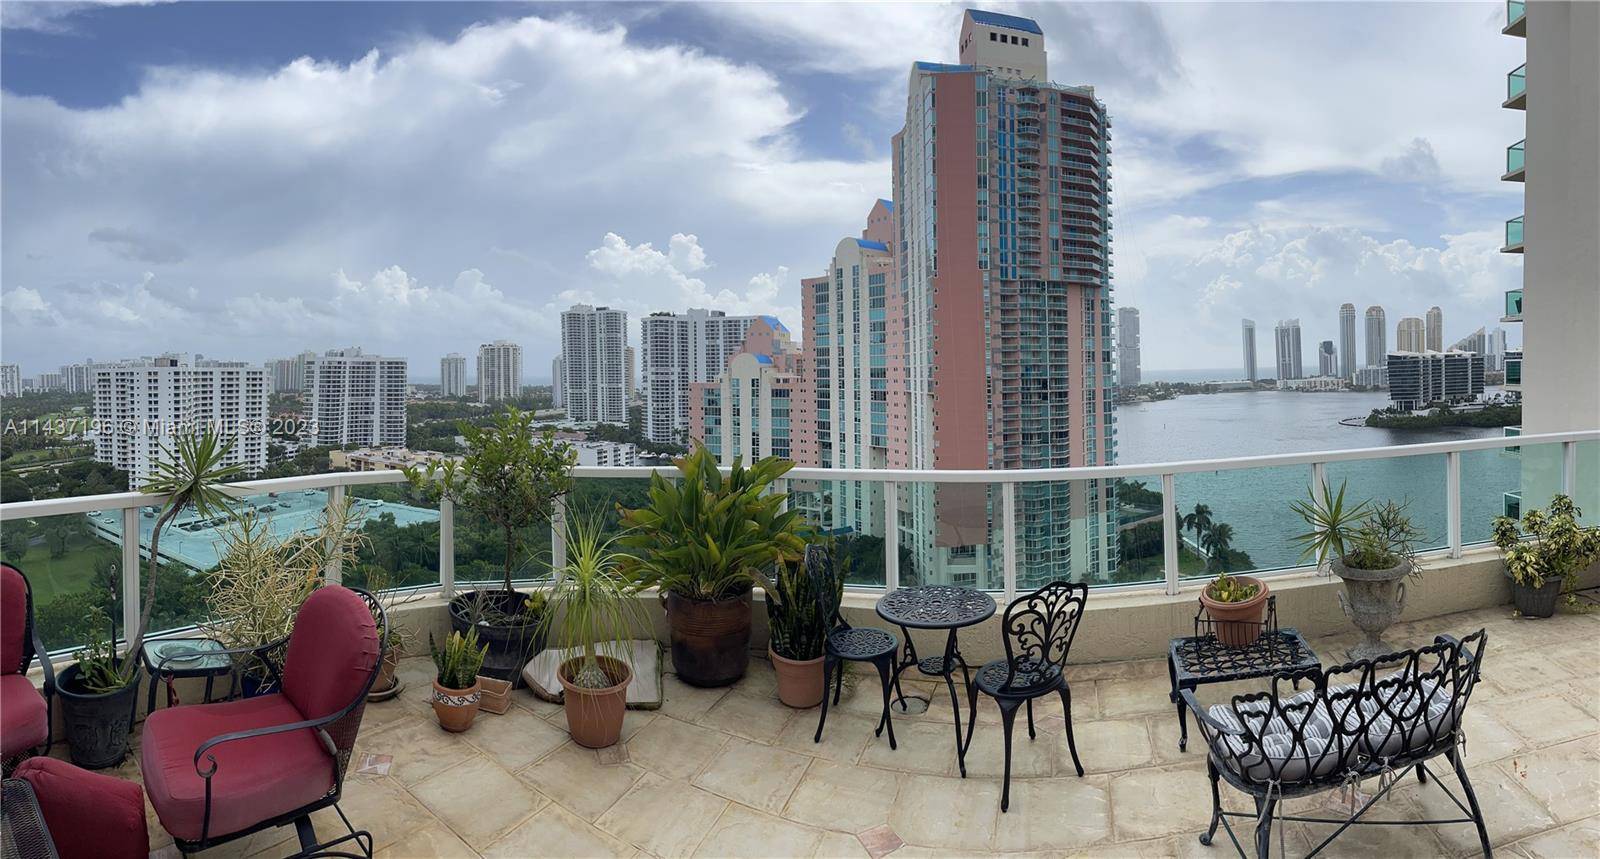 Breathtaking panoramic views of the ocean, Intracoastal Sunny Isles skyline from this TWO STORY PENTHOUSE in the secluded enclave community in Aventura with a marina and biking walking path.